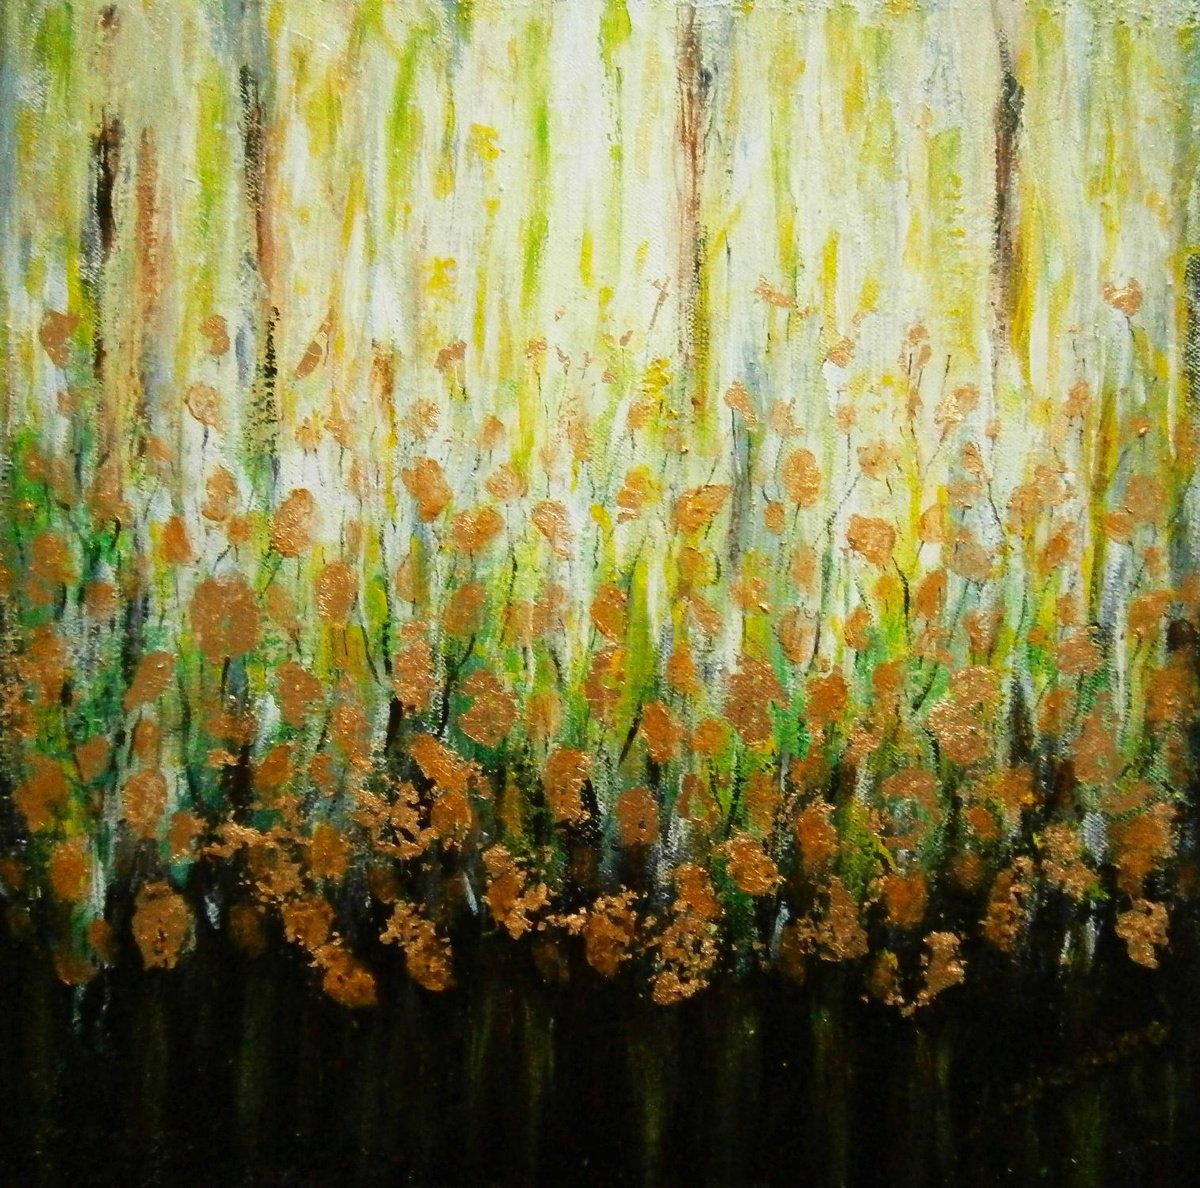 Abstract - nature in gold. by Em�lia Urban�kov�